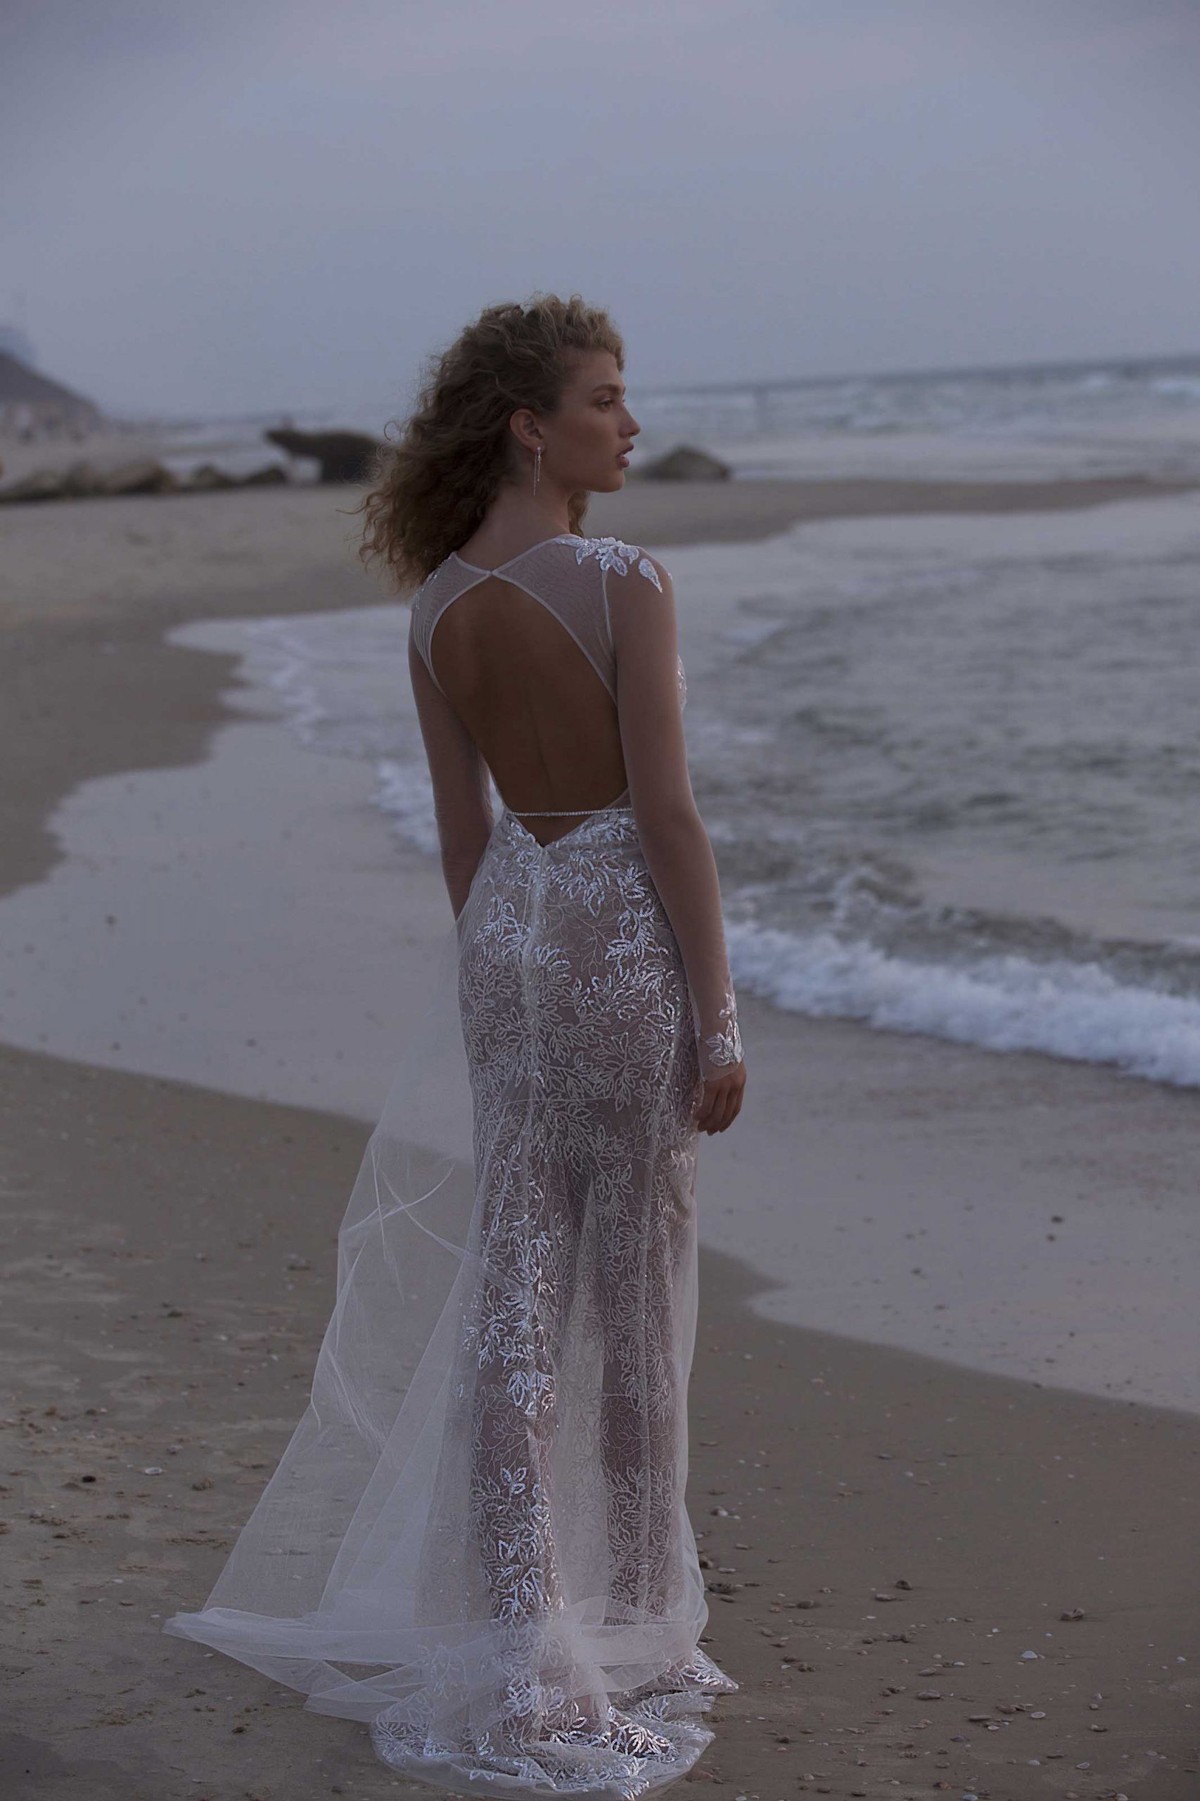 21-HARRIETT Bridal Dress Inspirated By Berta Muse 2021 Vista Mare Collection